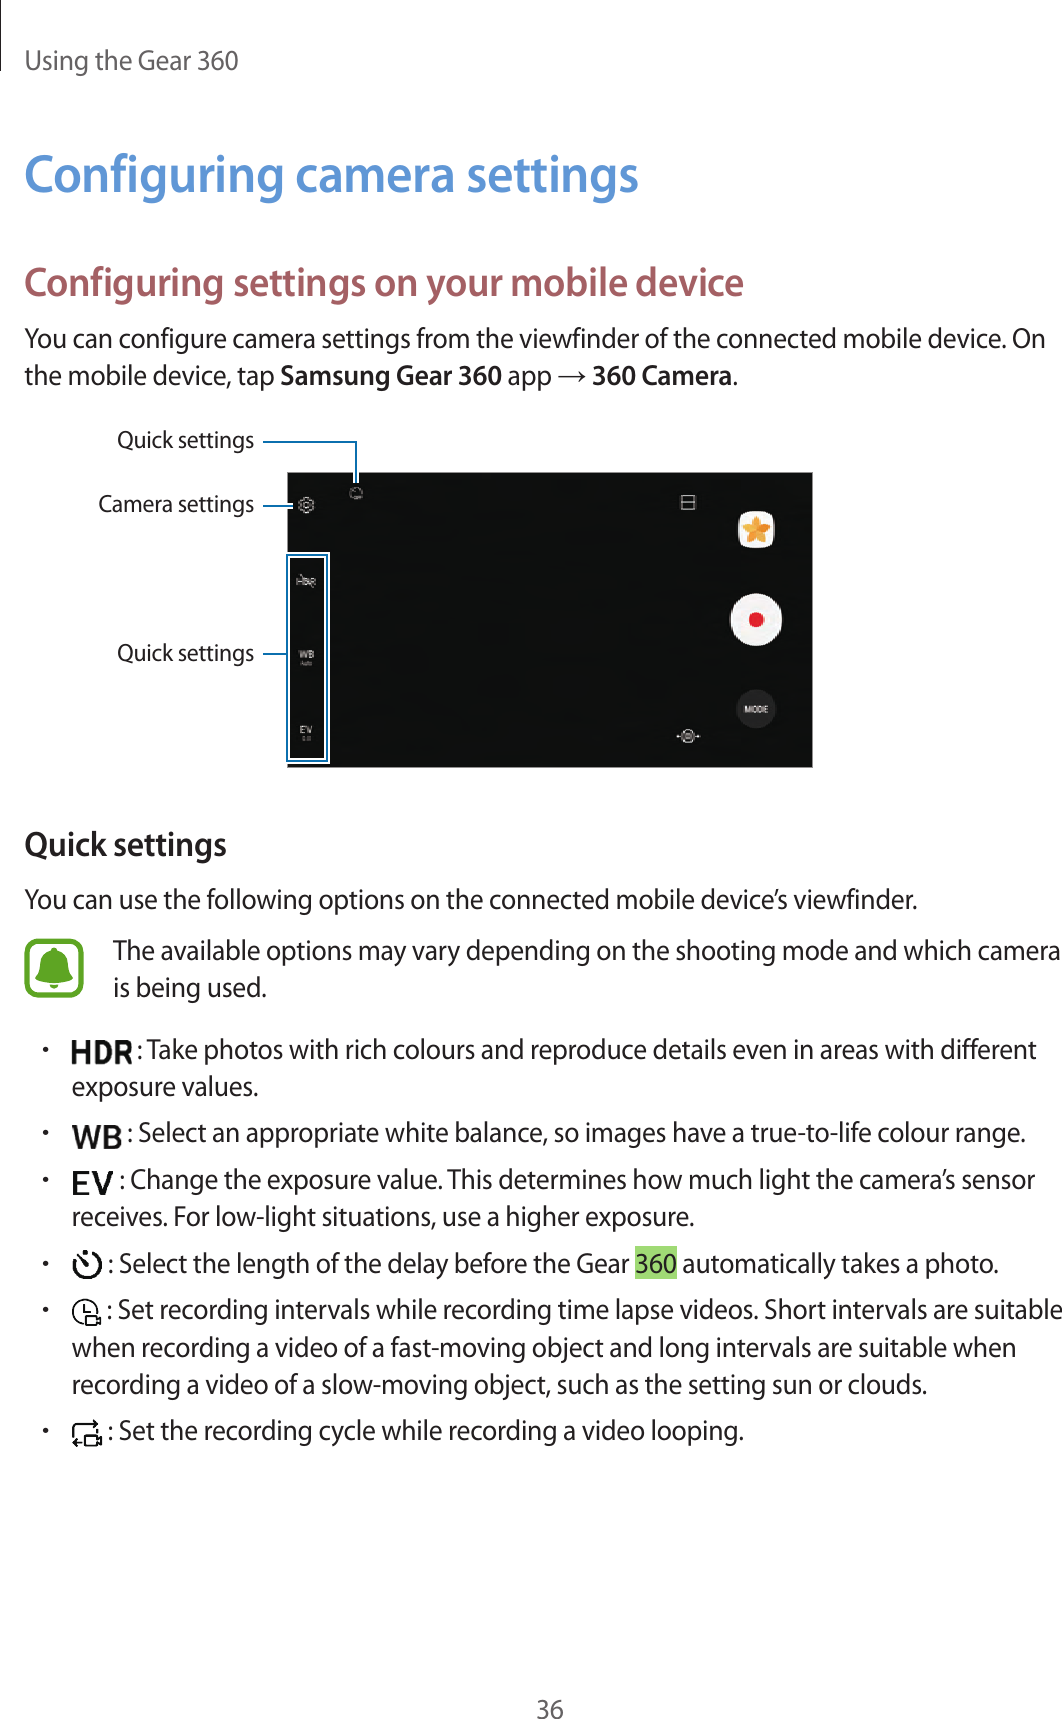 Using the Gear 36036Configuring camera settingsConfiguring settings on your mobile deviceYou can configure camera settings from the viewfinder of the connected mobile device. On the mobile device, tap Samsung Gear 360 app → 360 Camera.Quick settingsCamera settingsQuick settingsQuick settingsYou can use the following options on the connected mobile device’s viewfinder.The available options may vary depending on the shooting mode and which camera is being used.• : Take photos with rich colours and reproduce details even in areas with different exposure values.• : Select an appropriate white balance, so images have a true-to-life colour range.• : Change the exposure value. This determines how much light the camera’s sensor receives. For low-light situations, use a higher exposure.• : Select the length of the delay before the Gear 360 automatically takes a photo.• : Set recording intervals while recording time lapse videos. Short intervals are suitable when recording a video of a fast-moving object and long intervals are suitable when recording a video of a slow-moving object, such as the setting sun or clouds.• : Set the recording cycle while recording a video looping.